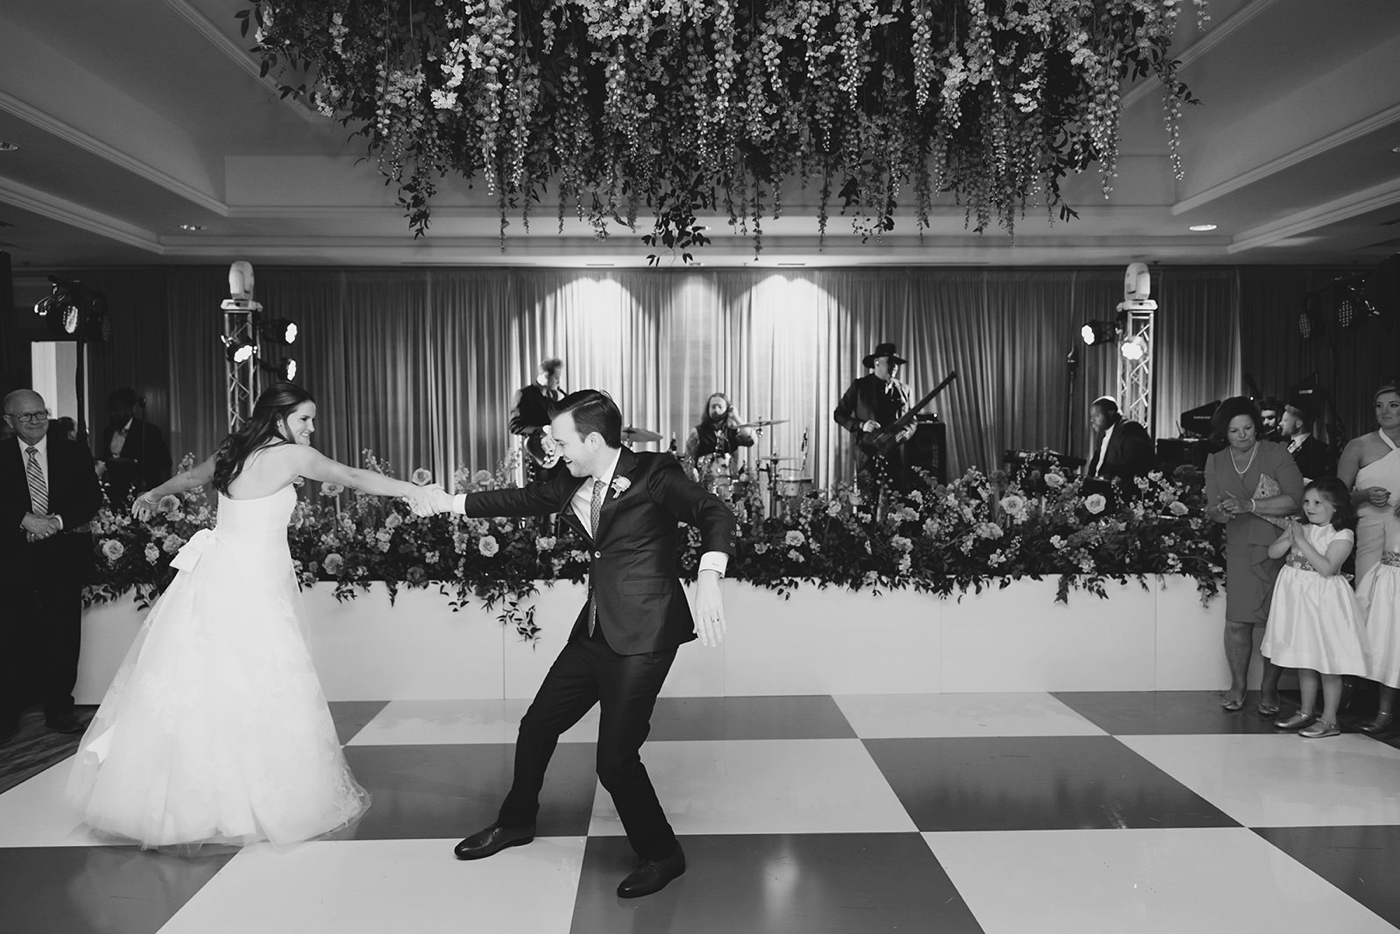 Bride and groom dancing on a checkered dance floor with hanging flowers